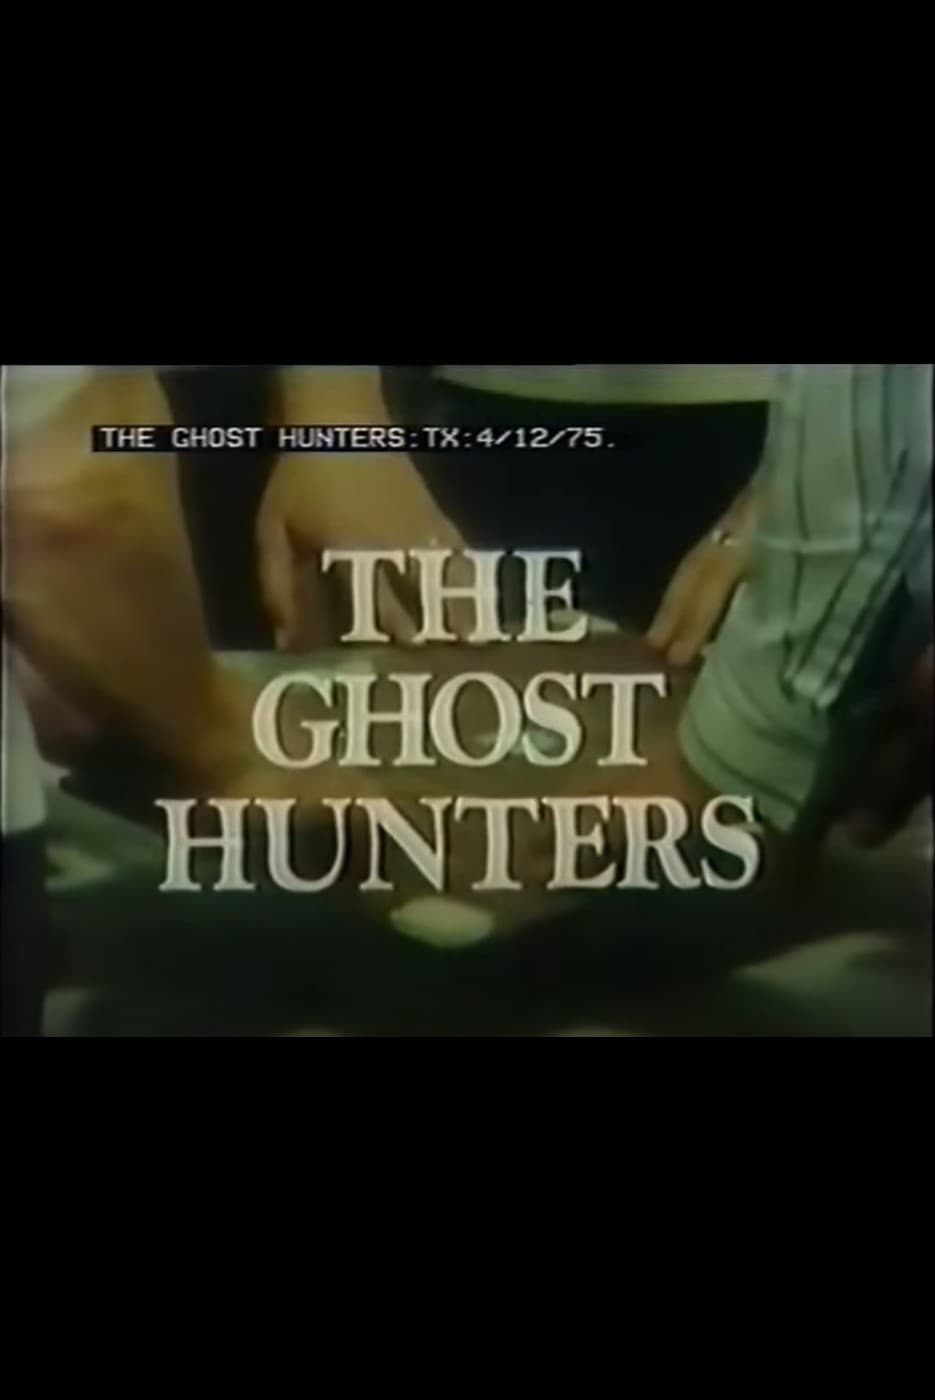 The Ghost Hunters